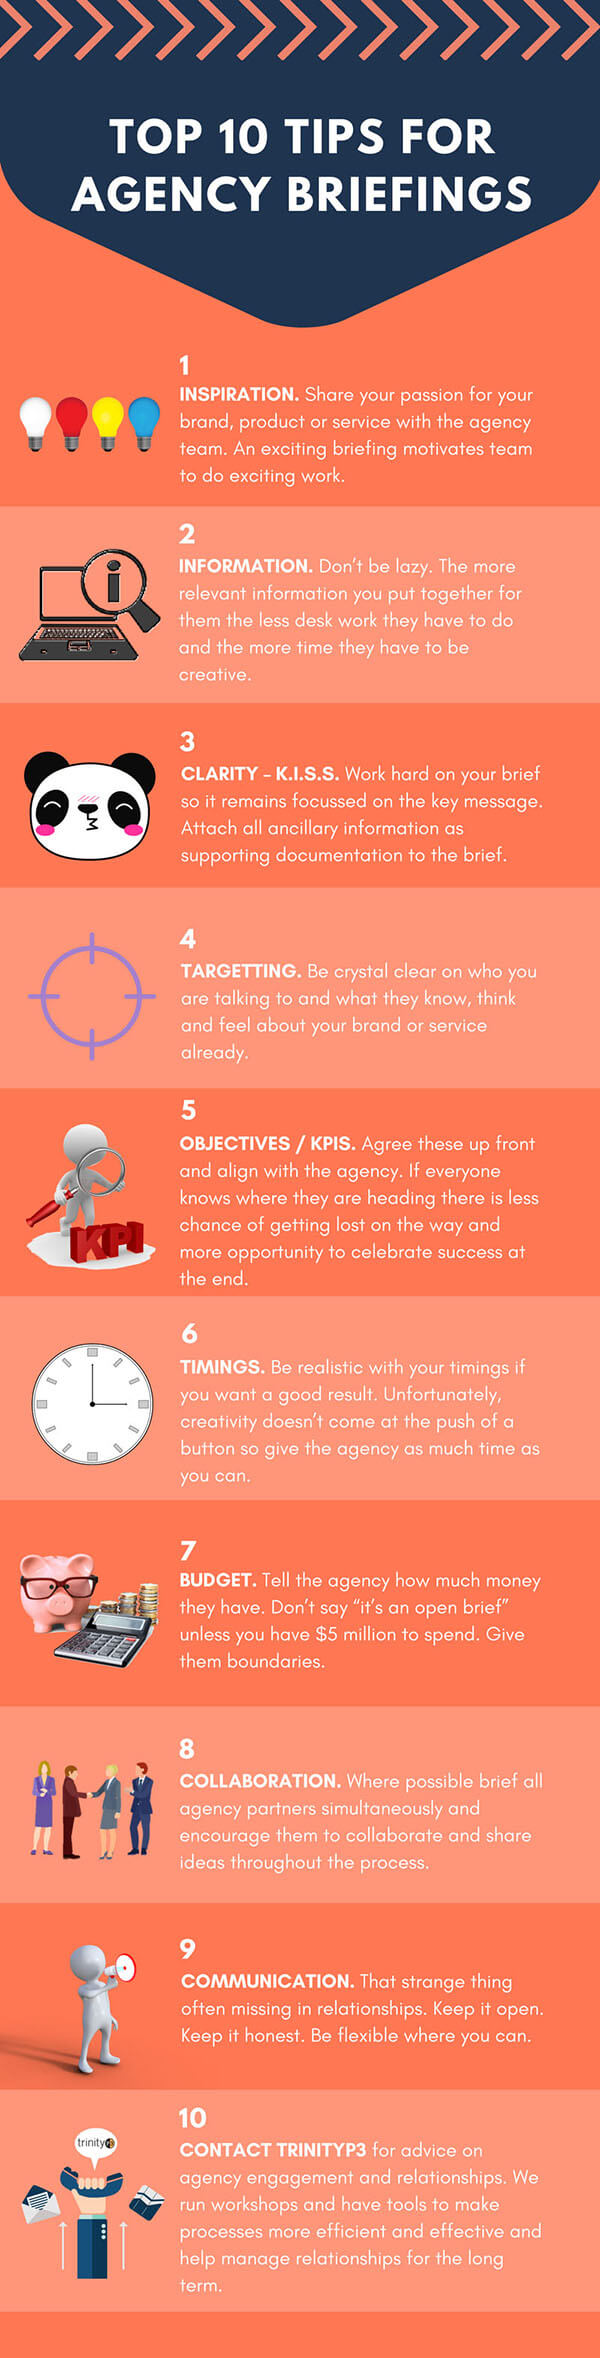 Top 10 Tips For Agency Briefings - Infographic